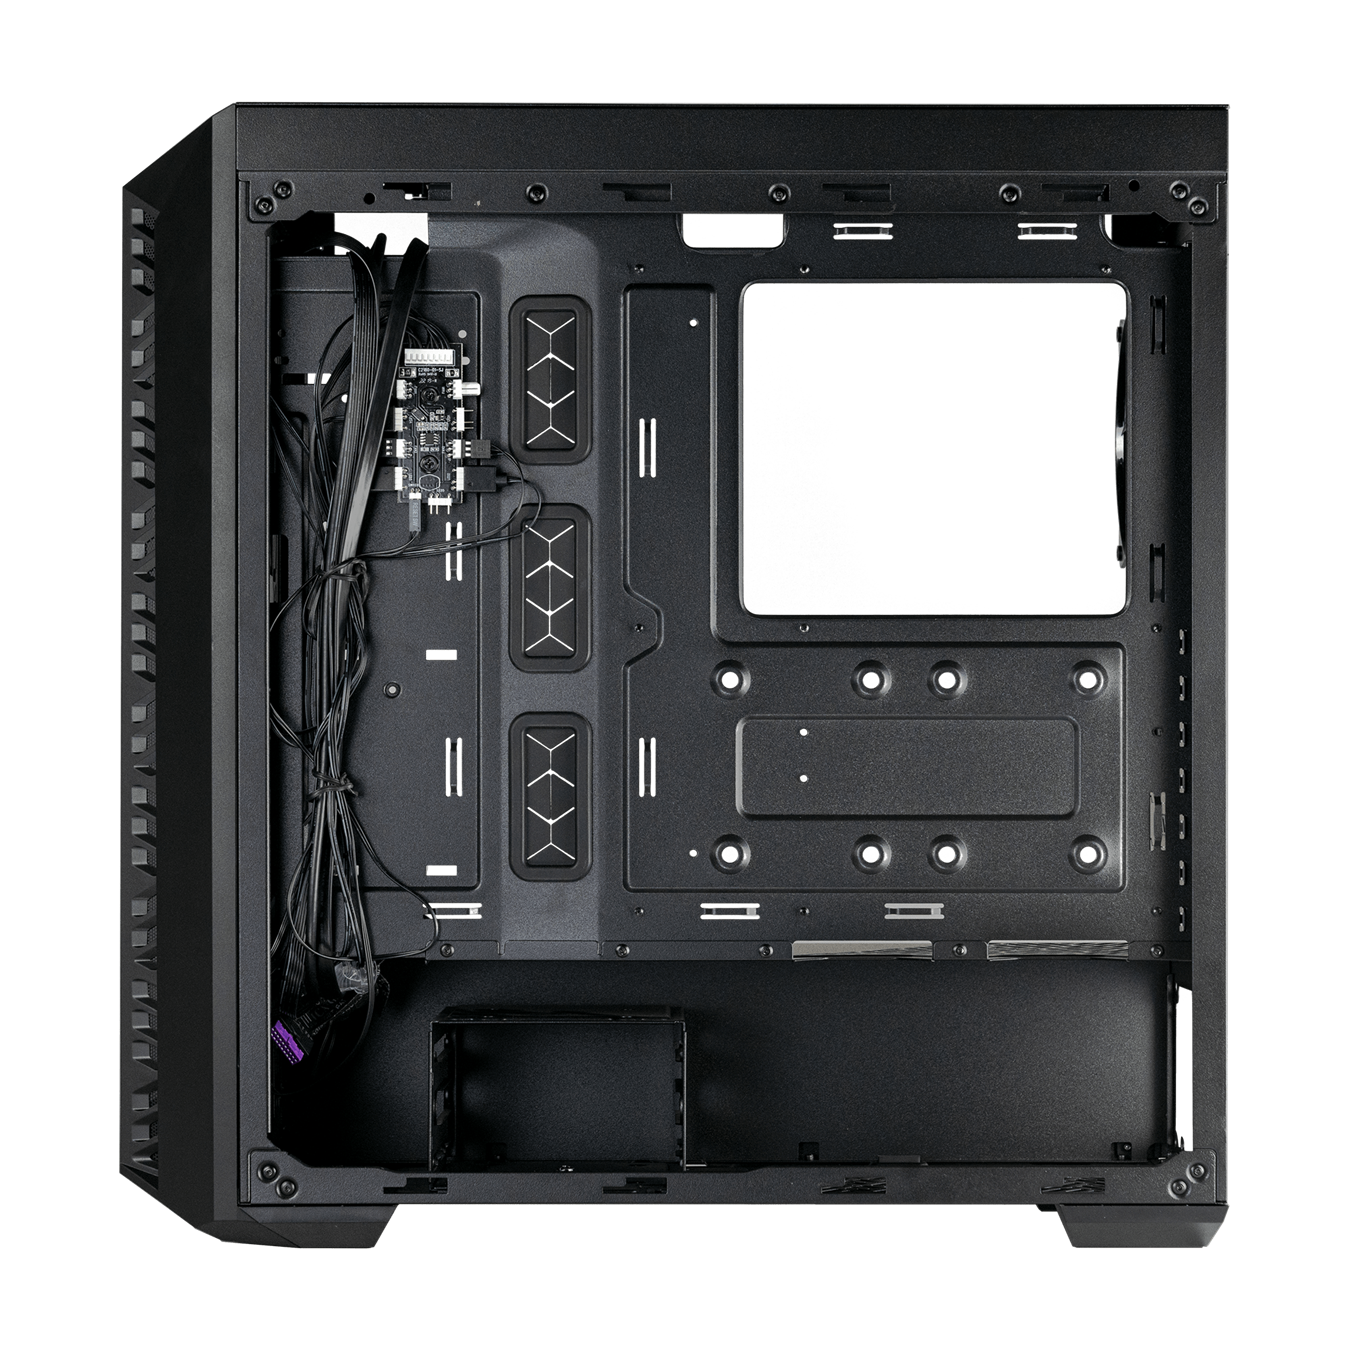 Cooler Master MB520 Mesh Computer Case Black 3 x 120mm ARGB Fans Pre-Installed Type C Connector in Front Top Removable 360mm Radiator Support High Airflow Case PWM & ARGB Hub Included-Cabinet-Cooler Master-Black-computerspace